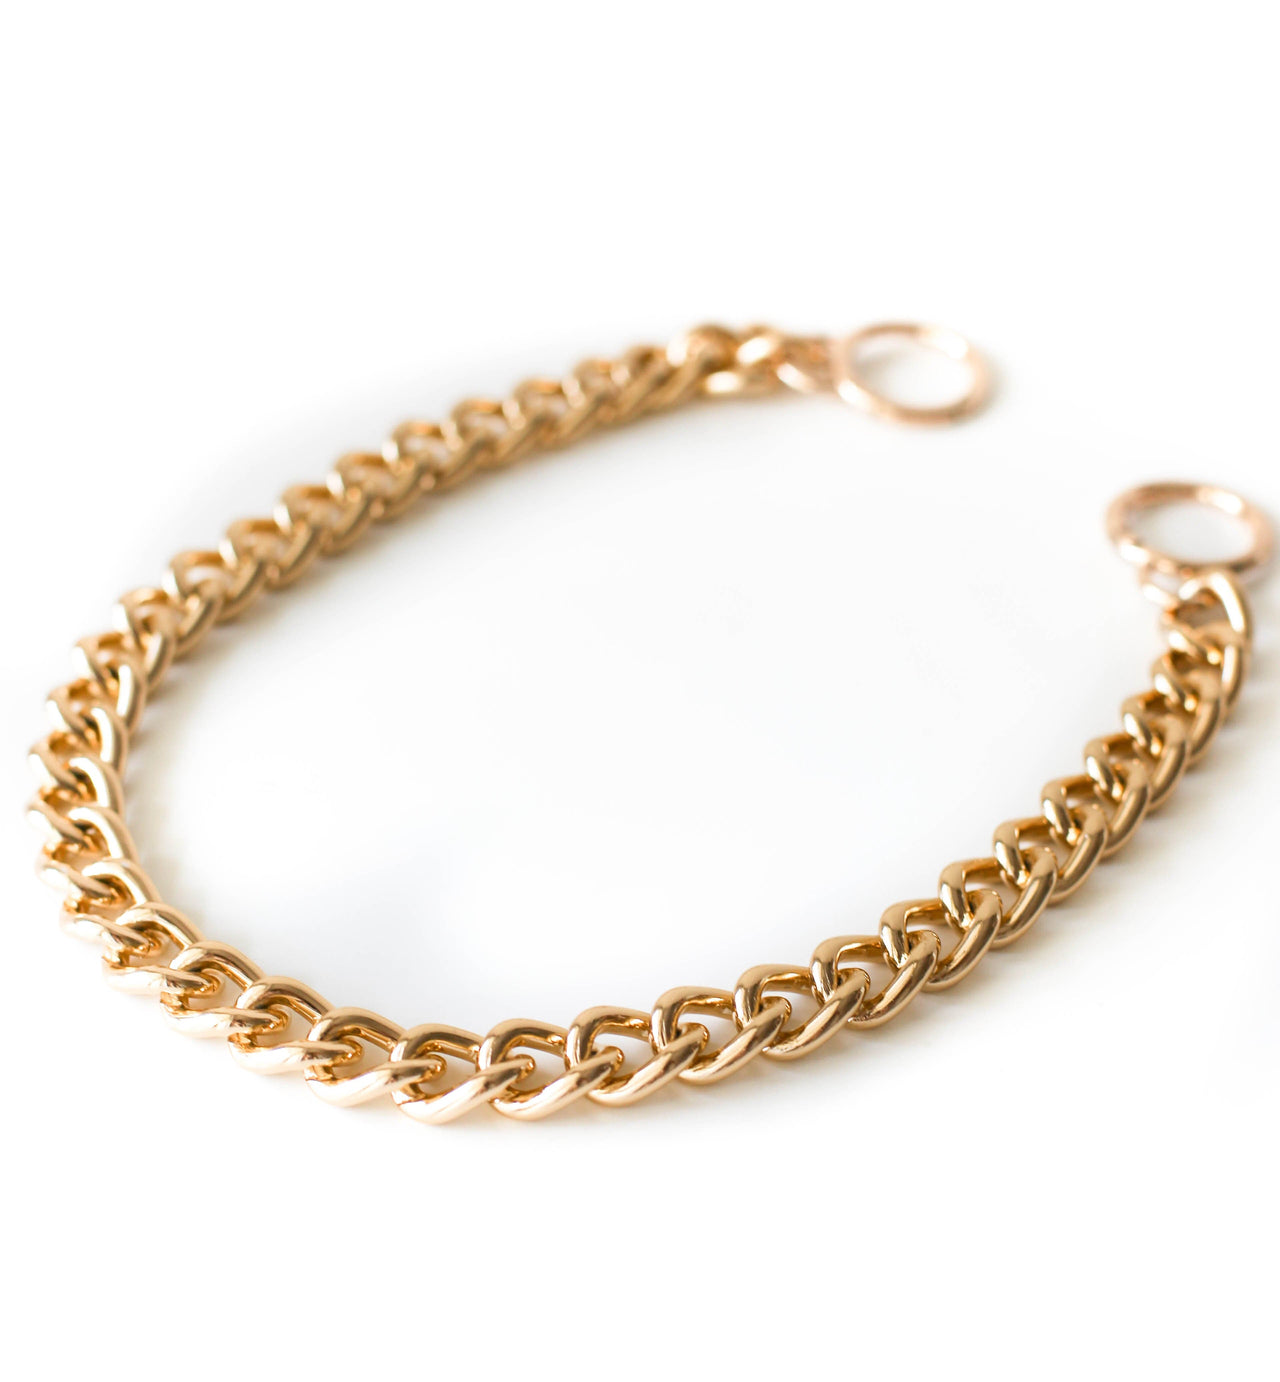 Additional Thick Rose Gold Chain For Bags